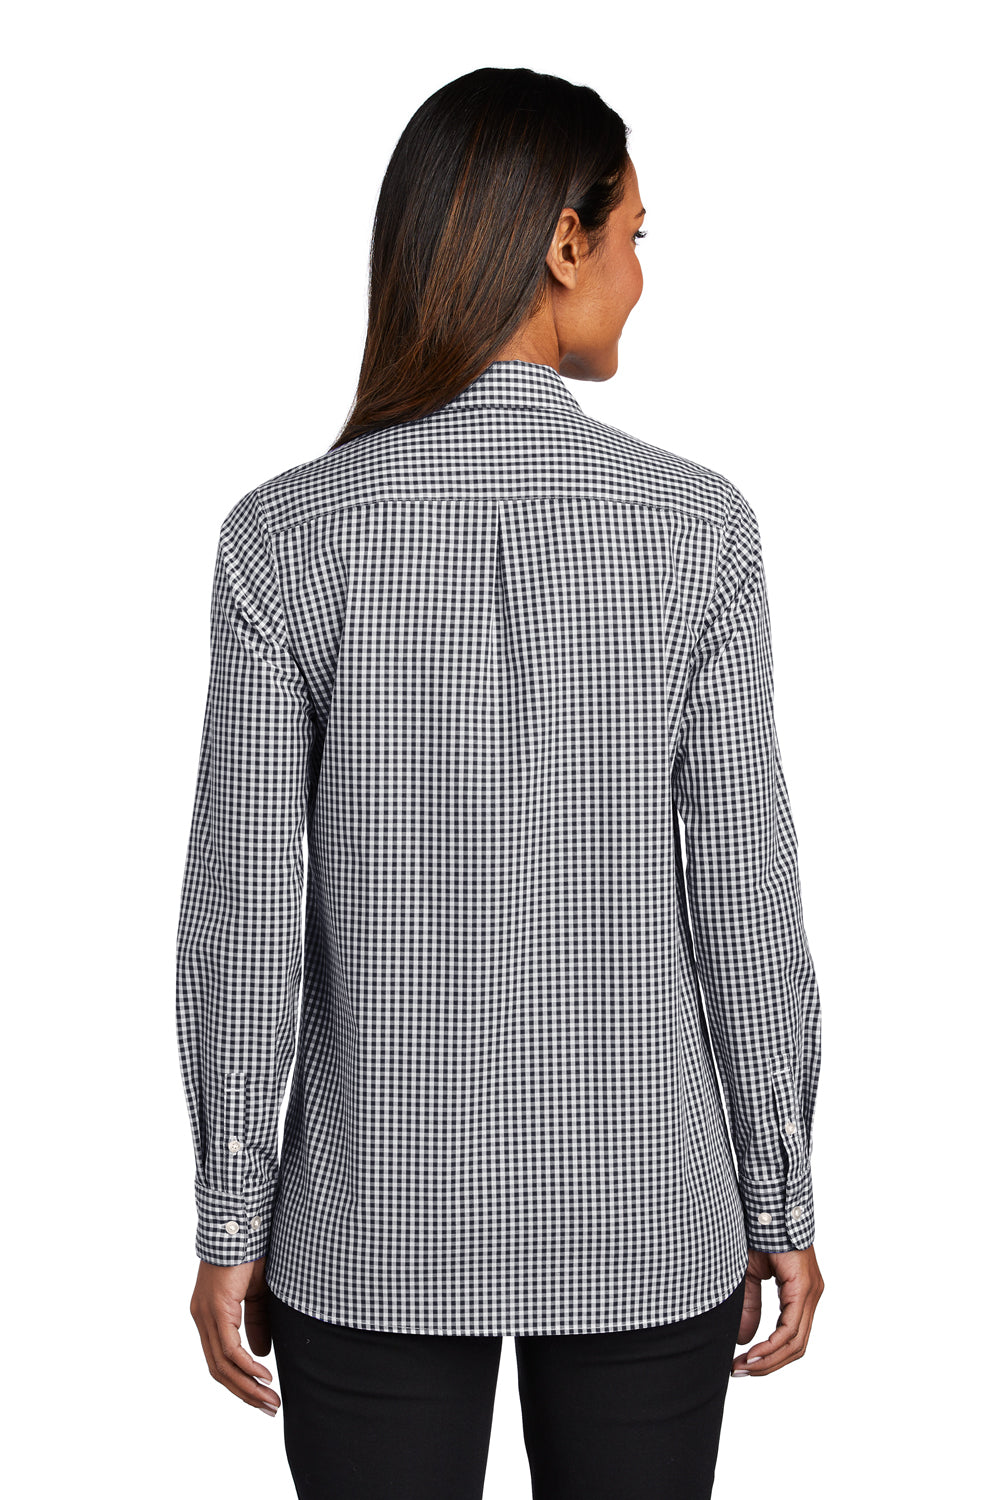 Port Authority Womens Broadcloth Gingham Long Sleeve Button Down Shirt Black/White Side